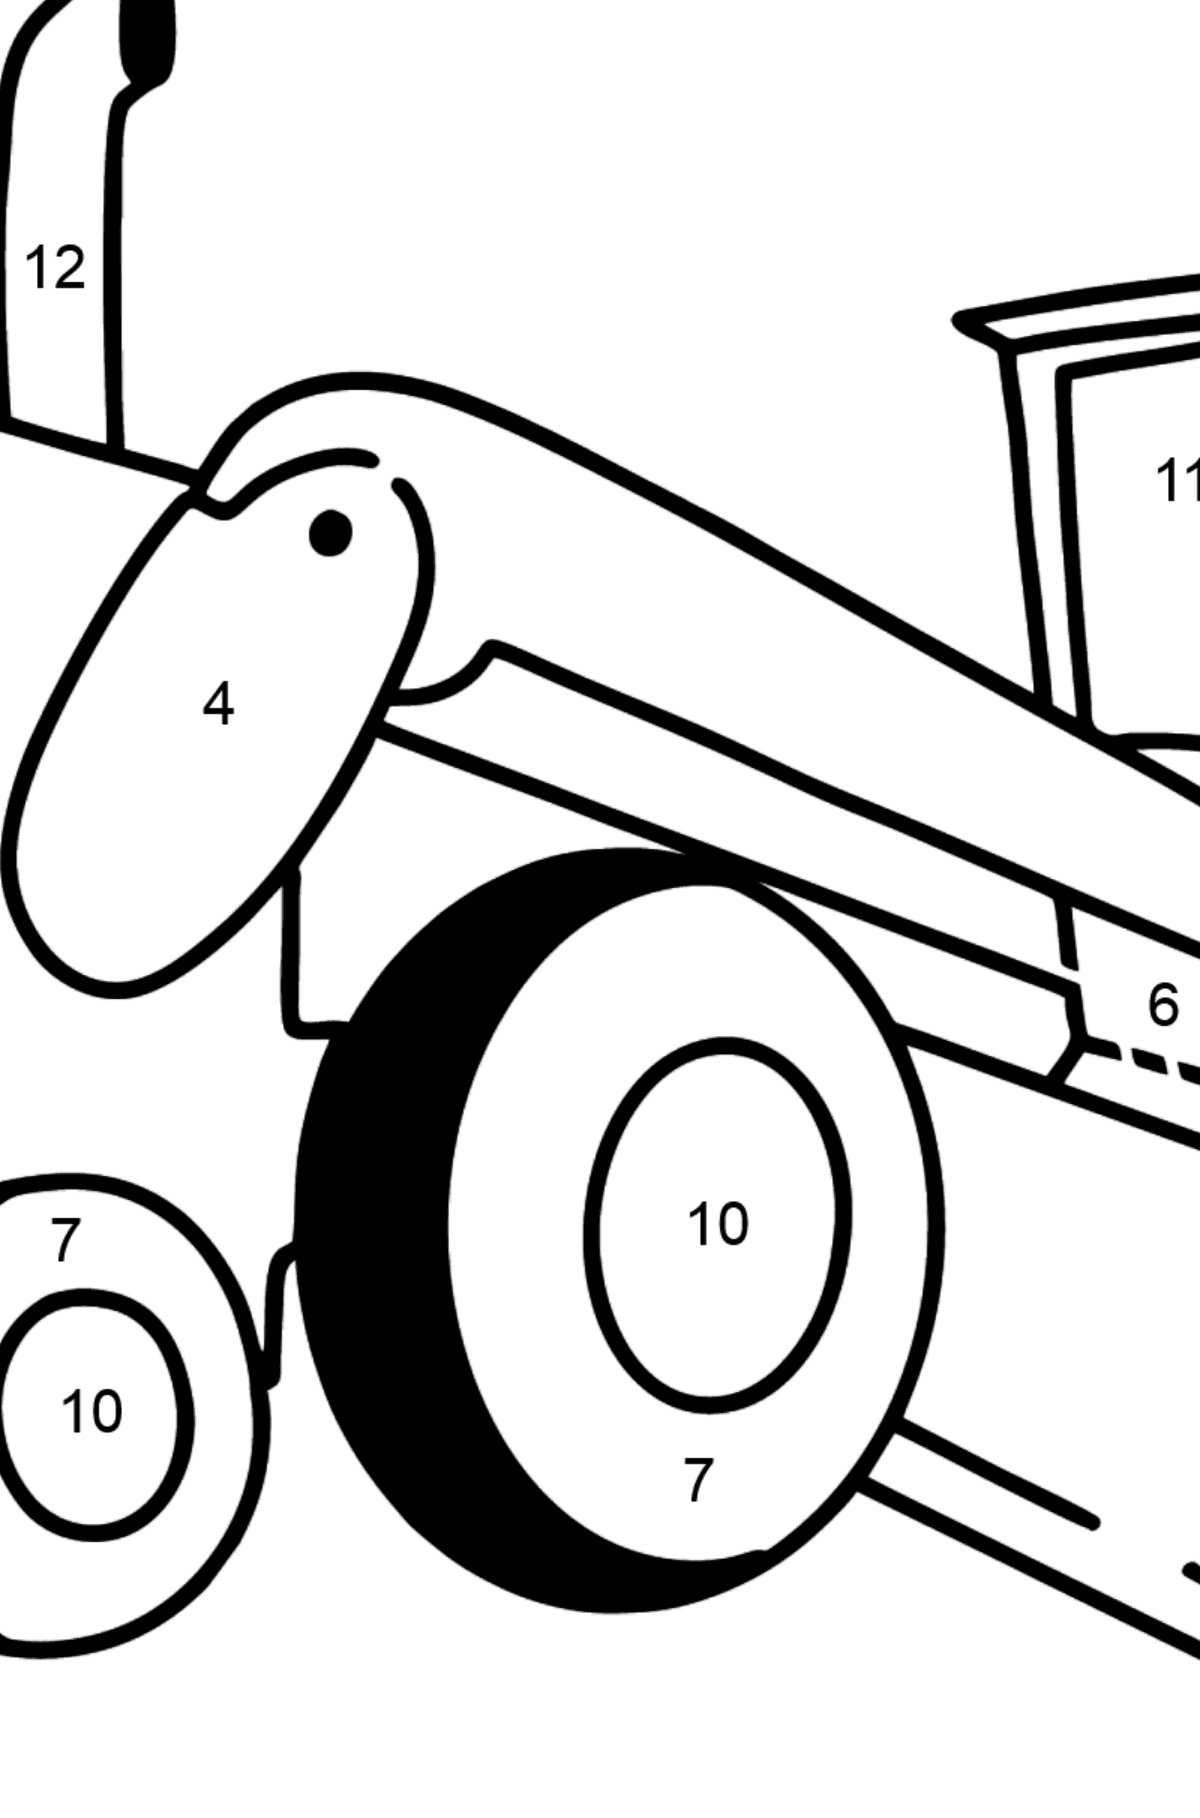 Tractor Grader coloring page - Coloring by Numbers for Kids